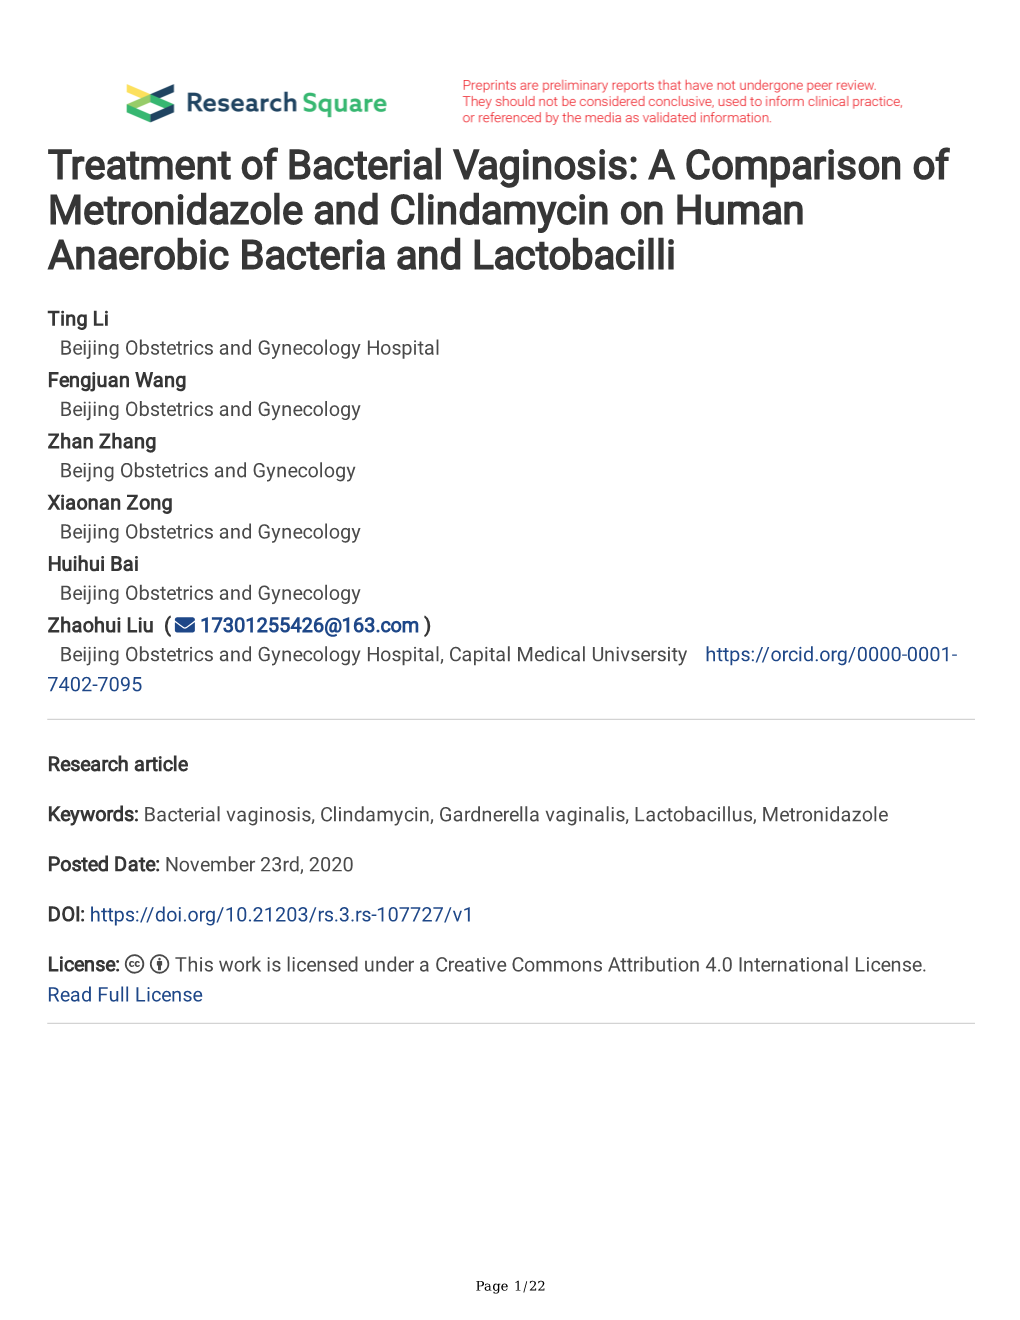 A Comparison of Metronidazole and Clindamycin on Human Anaerobic Bacteria and Lactobacilli